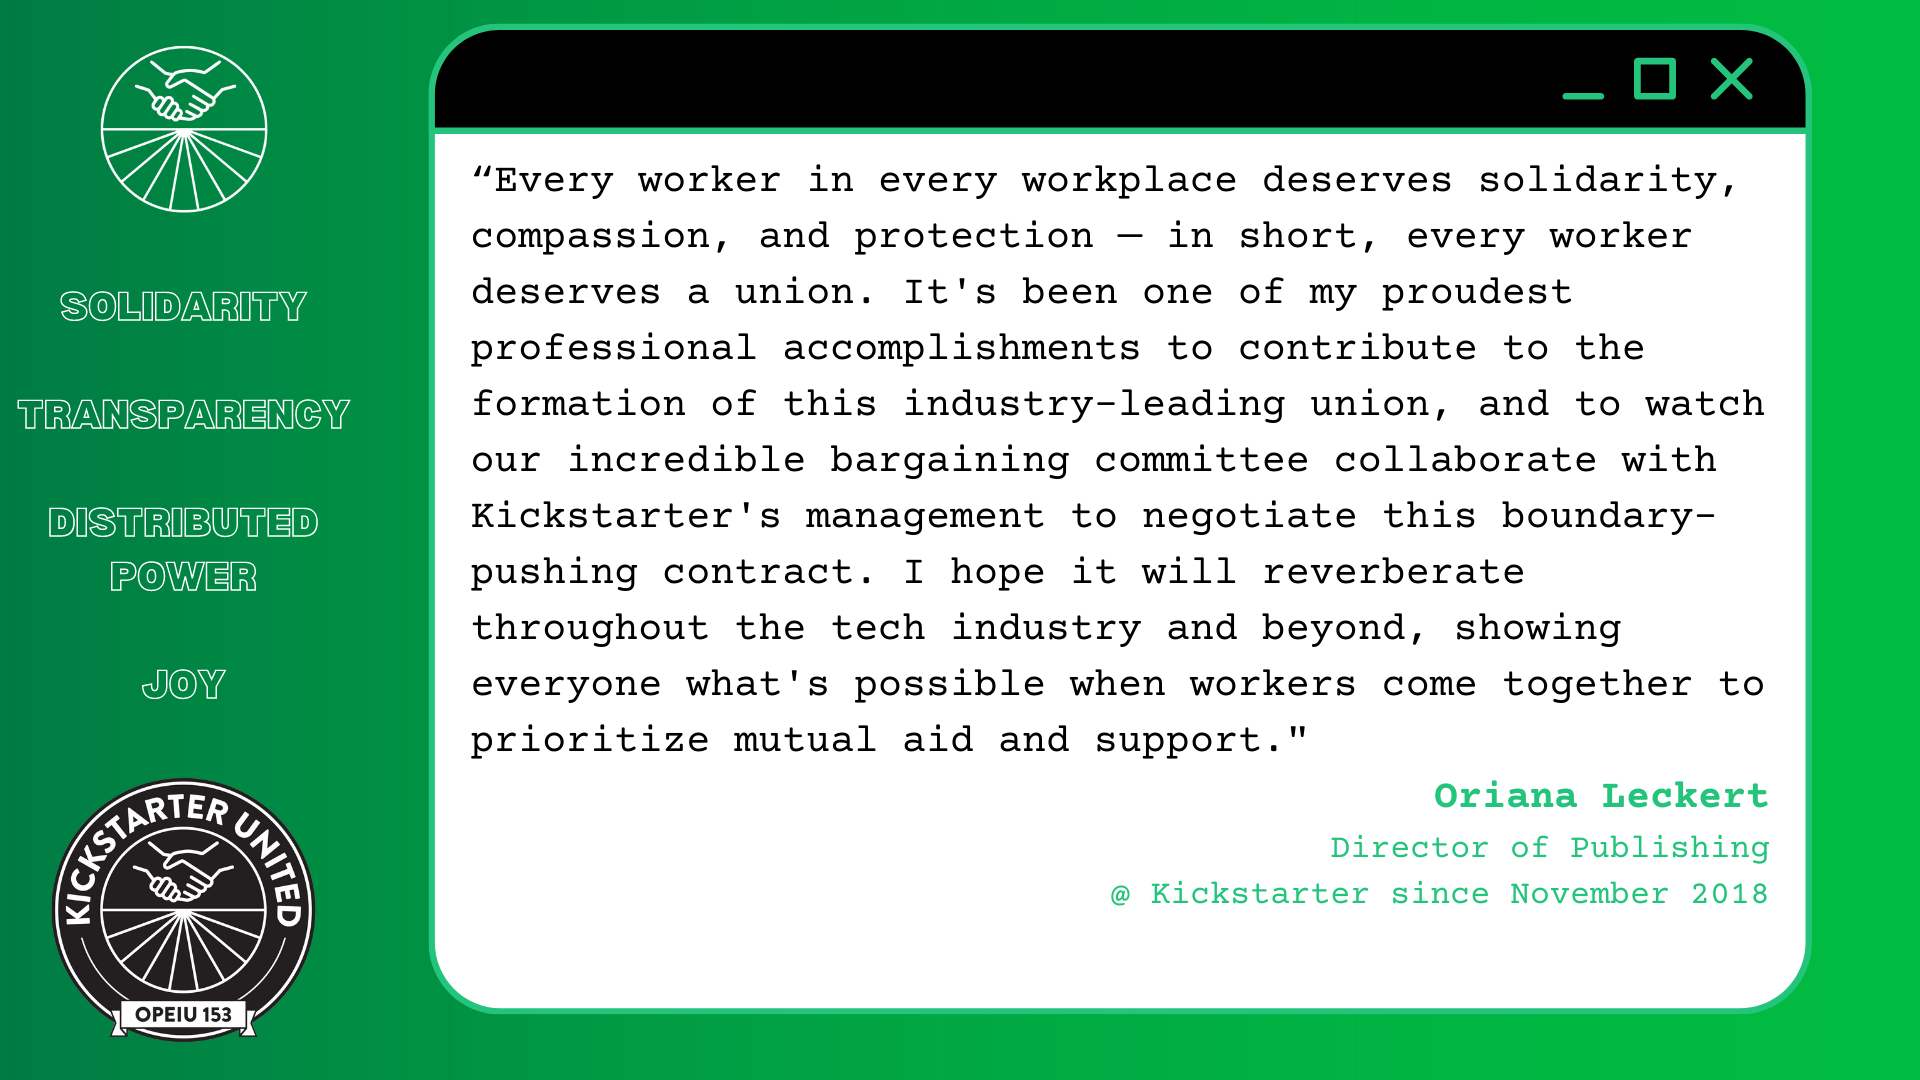 “Every worker in every workplace deserves solidarity, compassion, and protection — in short, every worker deserves a union. It's been one of my proudest professional accomplishments to contribute to the formation of this industry-leading union, and to watch our incredible bargaining committee collaborate with Kickstarter's management to negotiate this boundary-pushing contract. I hope it will reverberate throughout the tech industry and beyond, showing everyone what's possible when workers come together to prioritize mutual aid and support.” Oriana Leckert, Director of Publishing @ Kickstarter since November 2018